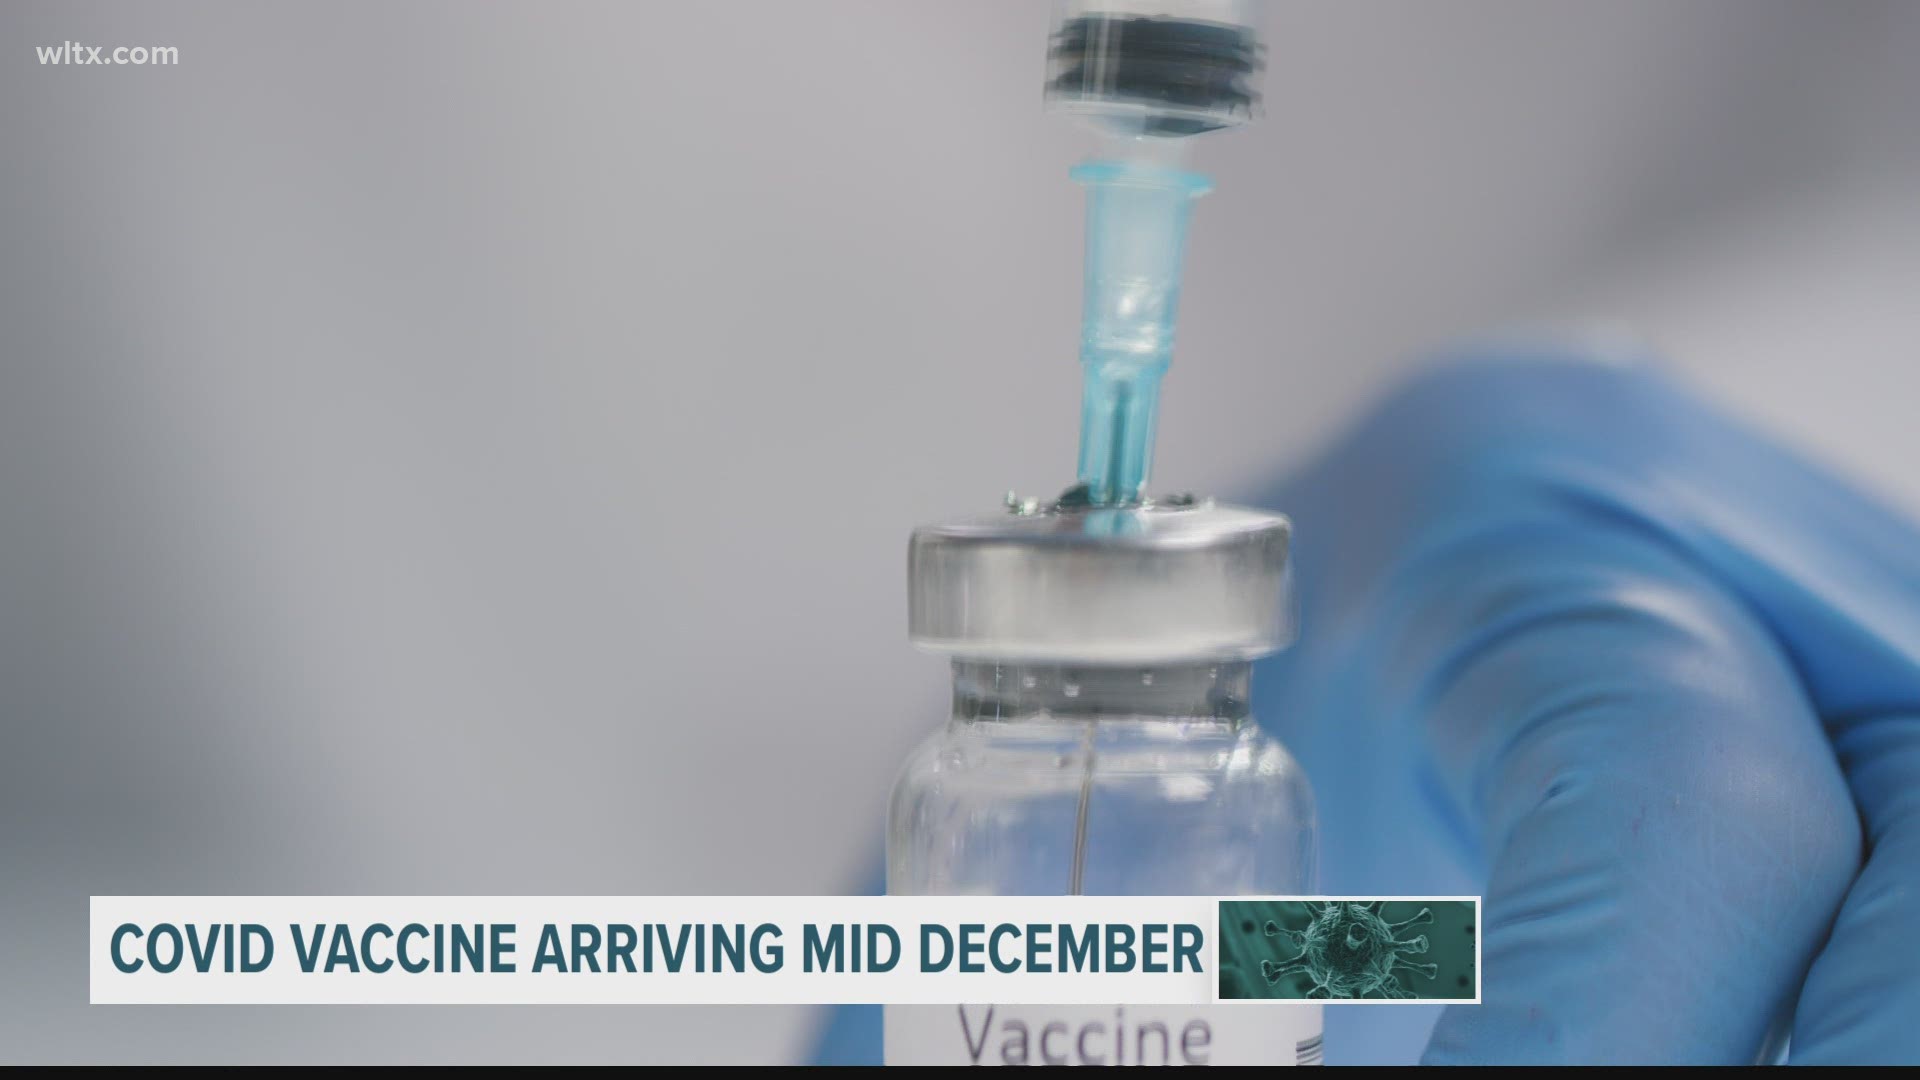 South Carolina could be getting its first shipment of coronavirus vaccines as early as December 14. Here's the latest on the vaccine distribution plan.